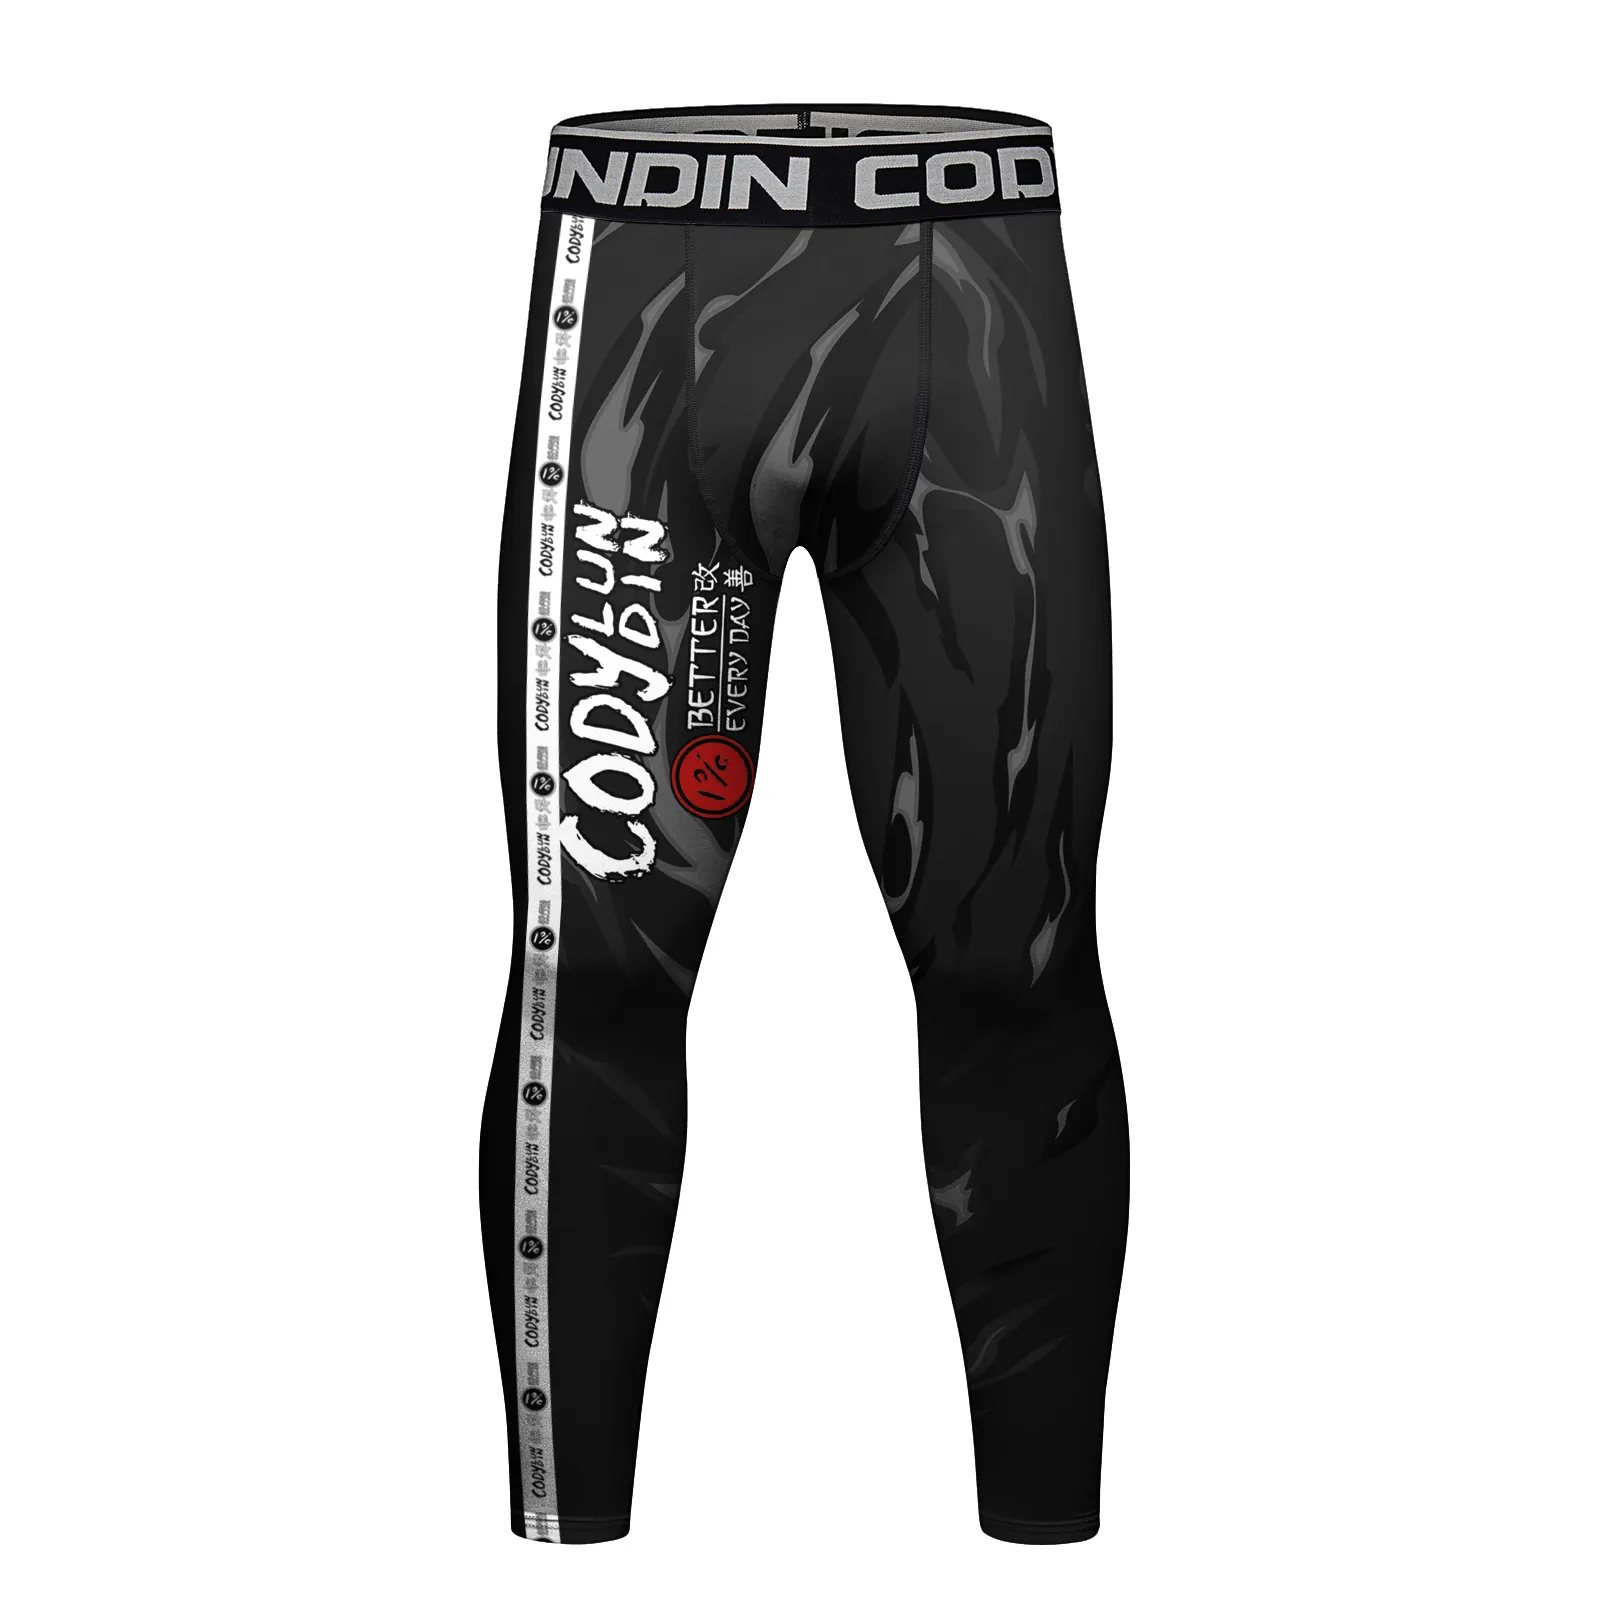 Cody Lundin Sublimated Stretchable sportswear legging Active Wear Wholesale Workout Sport Gym Athleisure High Waist Men Tights